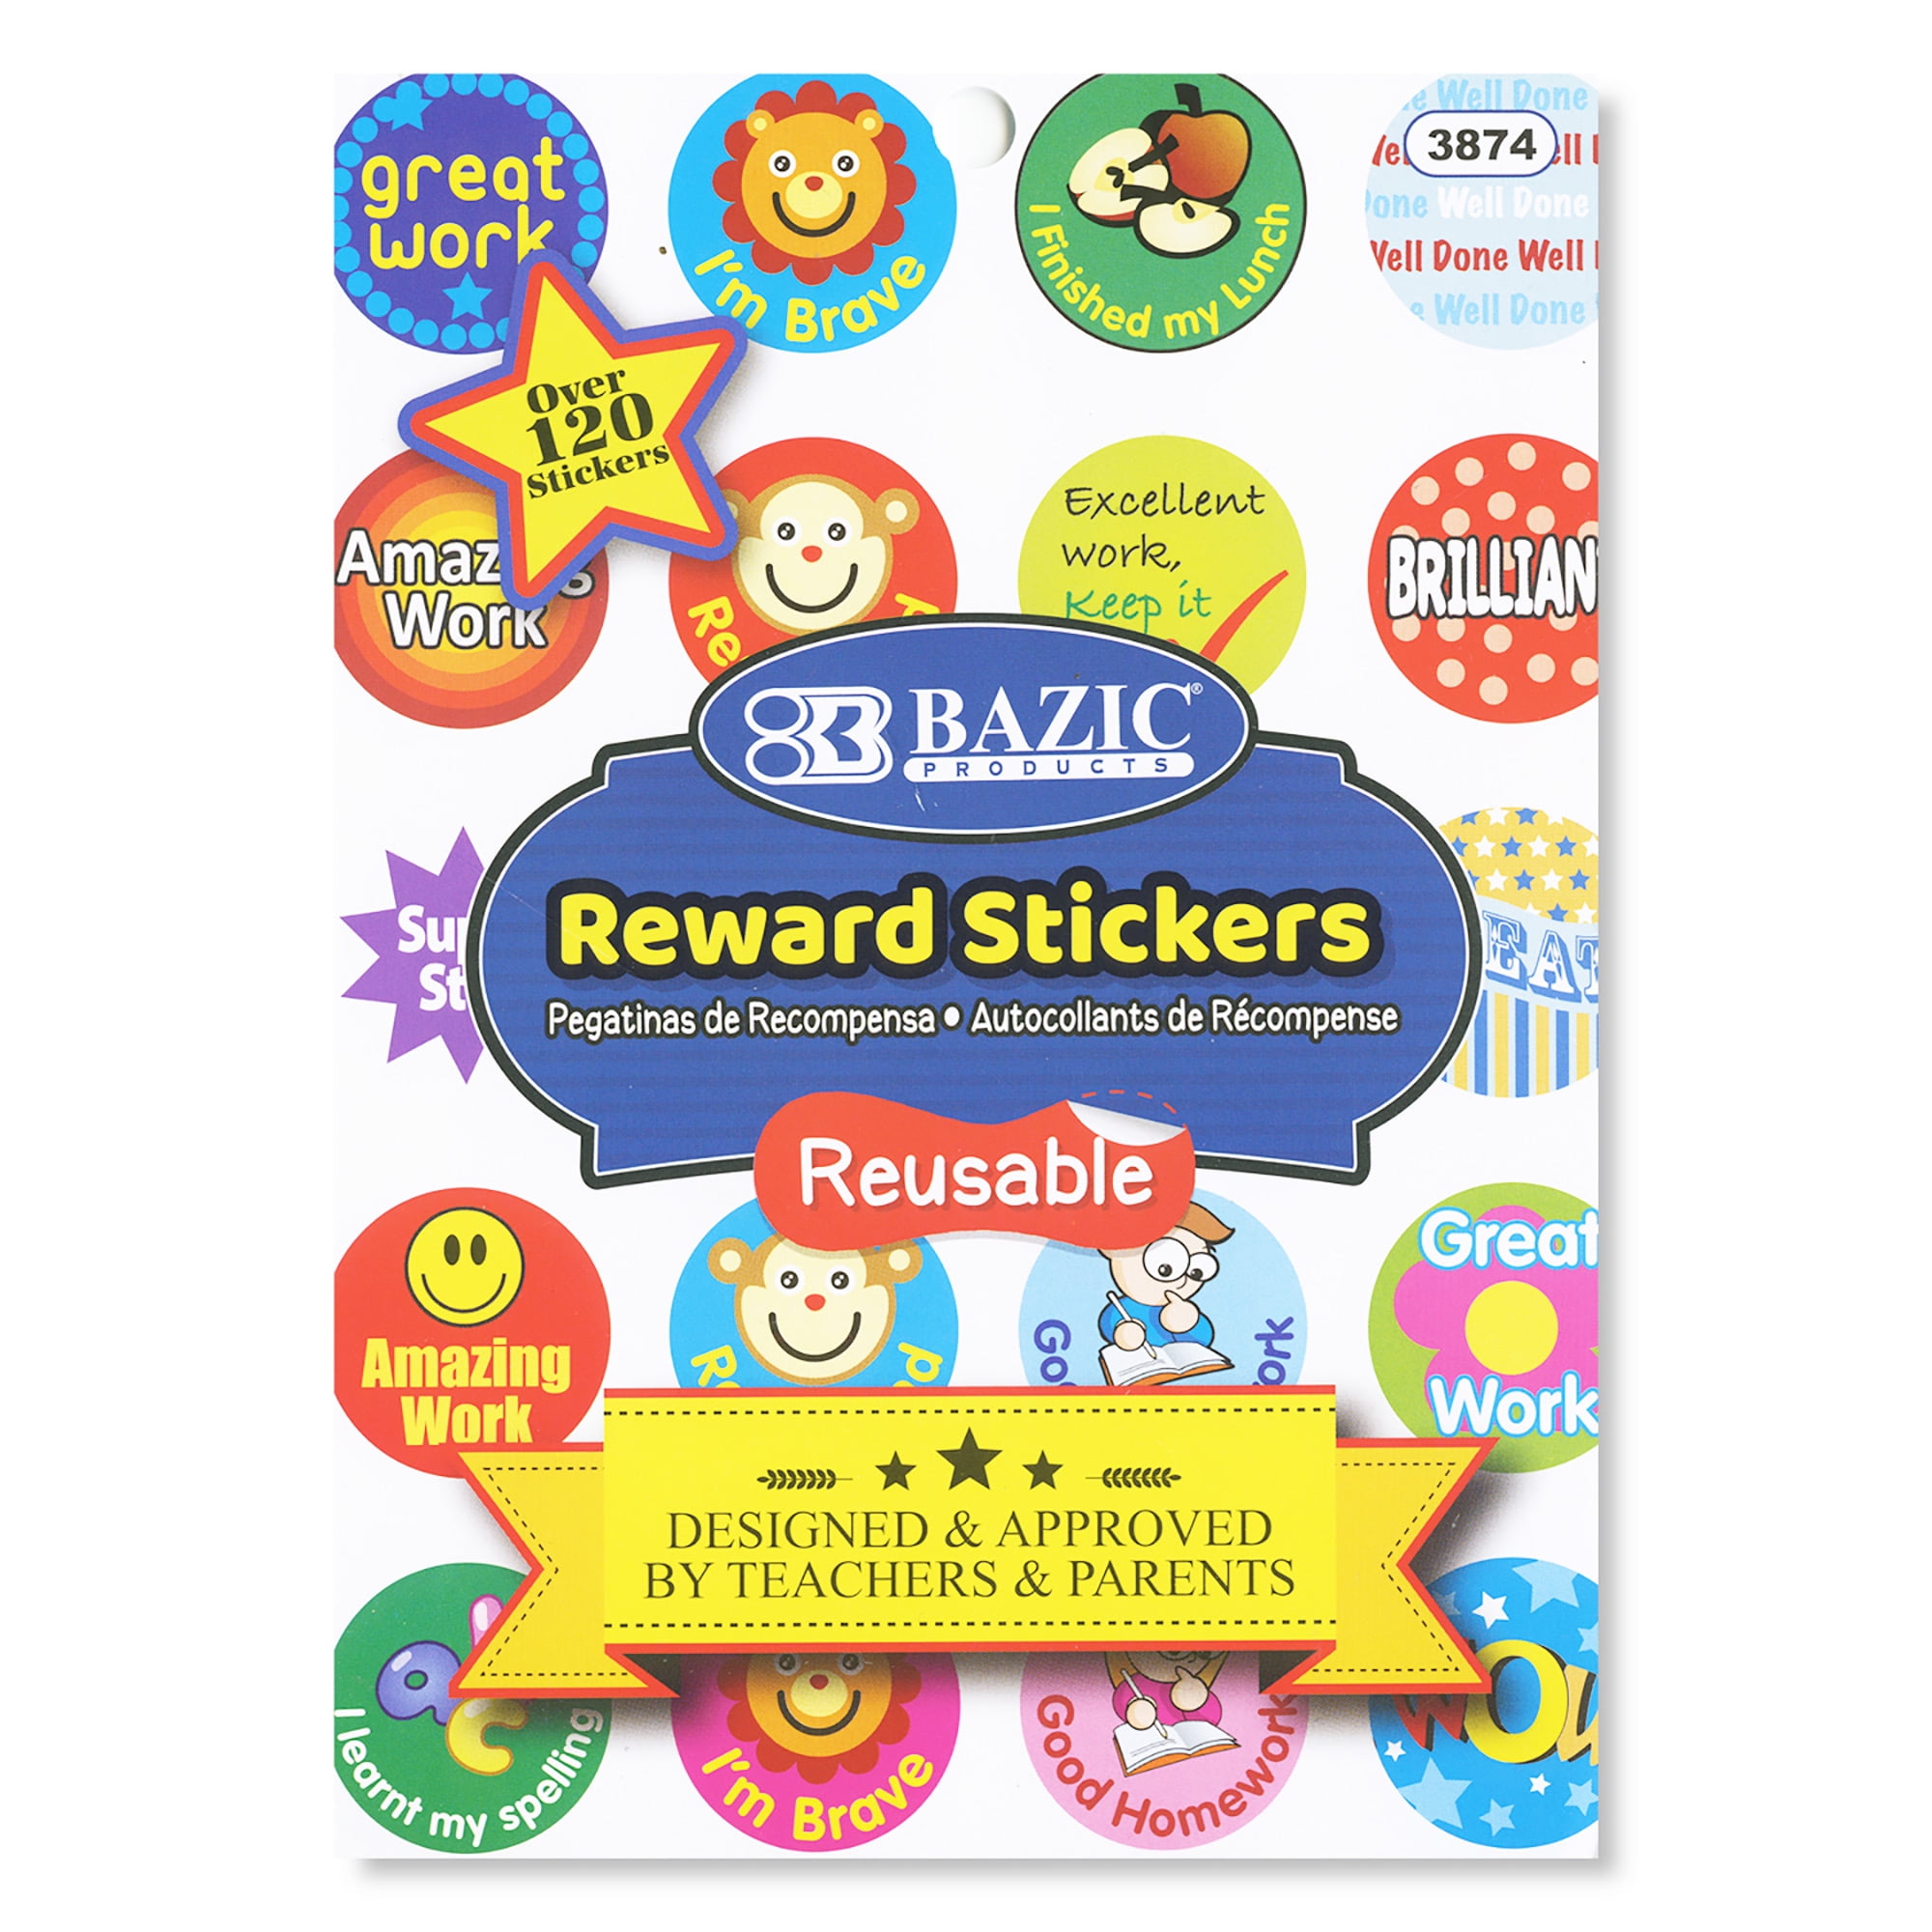 Incraftables Puffy Stickers for Boys 46 Sheets Self Adhesive 3D